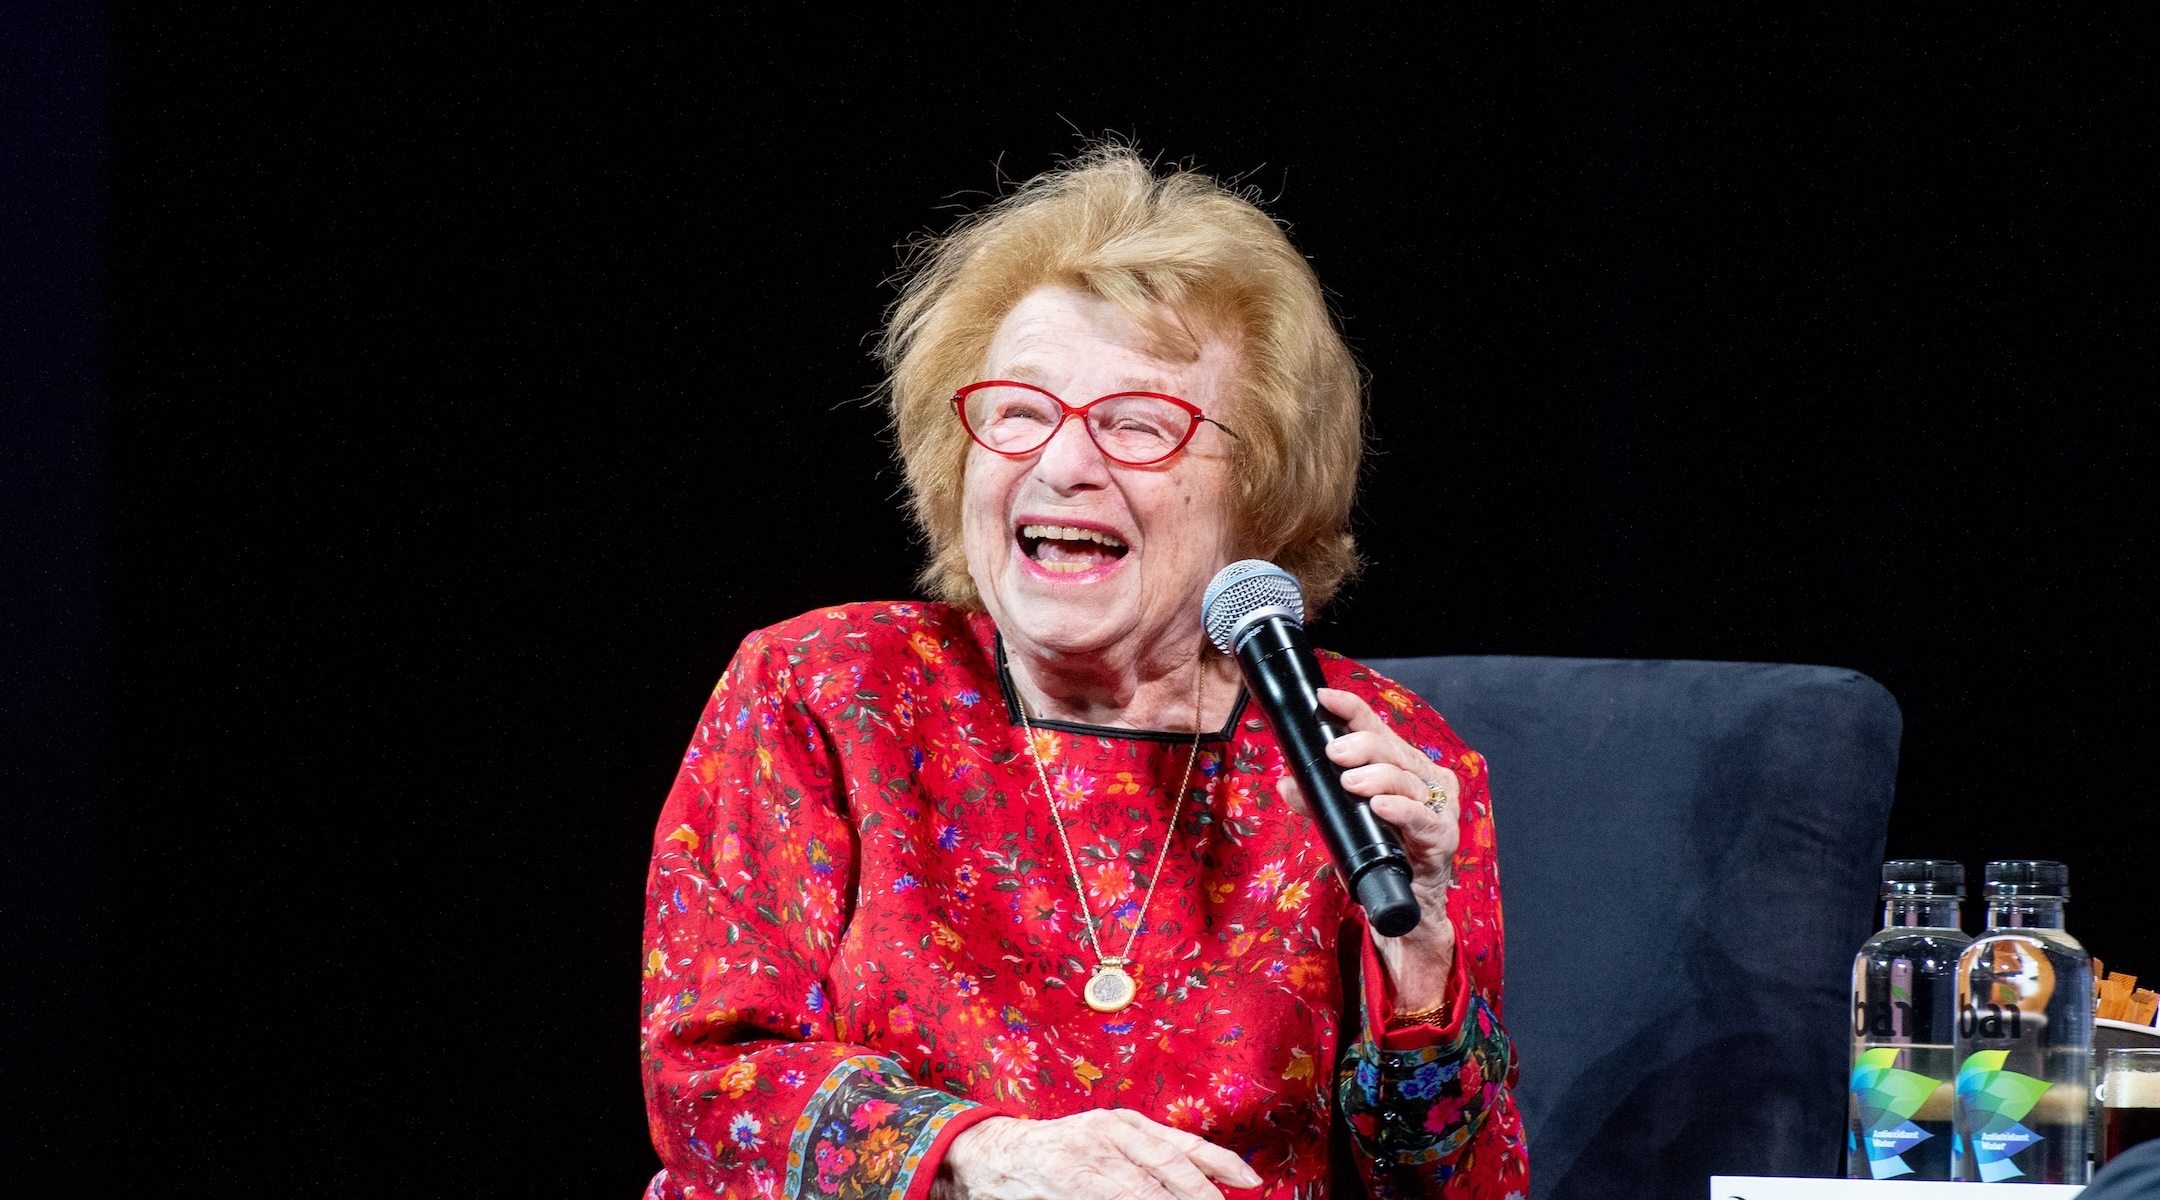 At Dr. Ruth’s intimate funeral, relatives honor a beloved “mommy,” “grandma” and friend